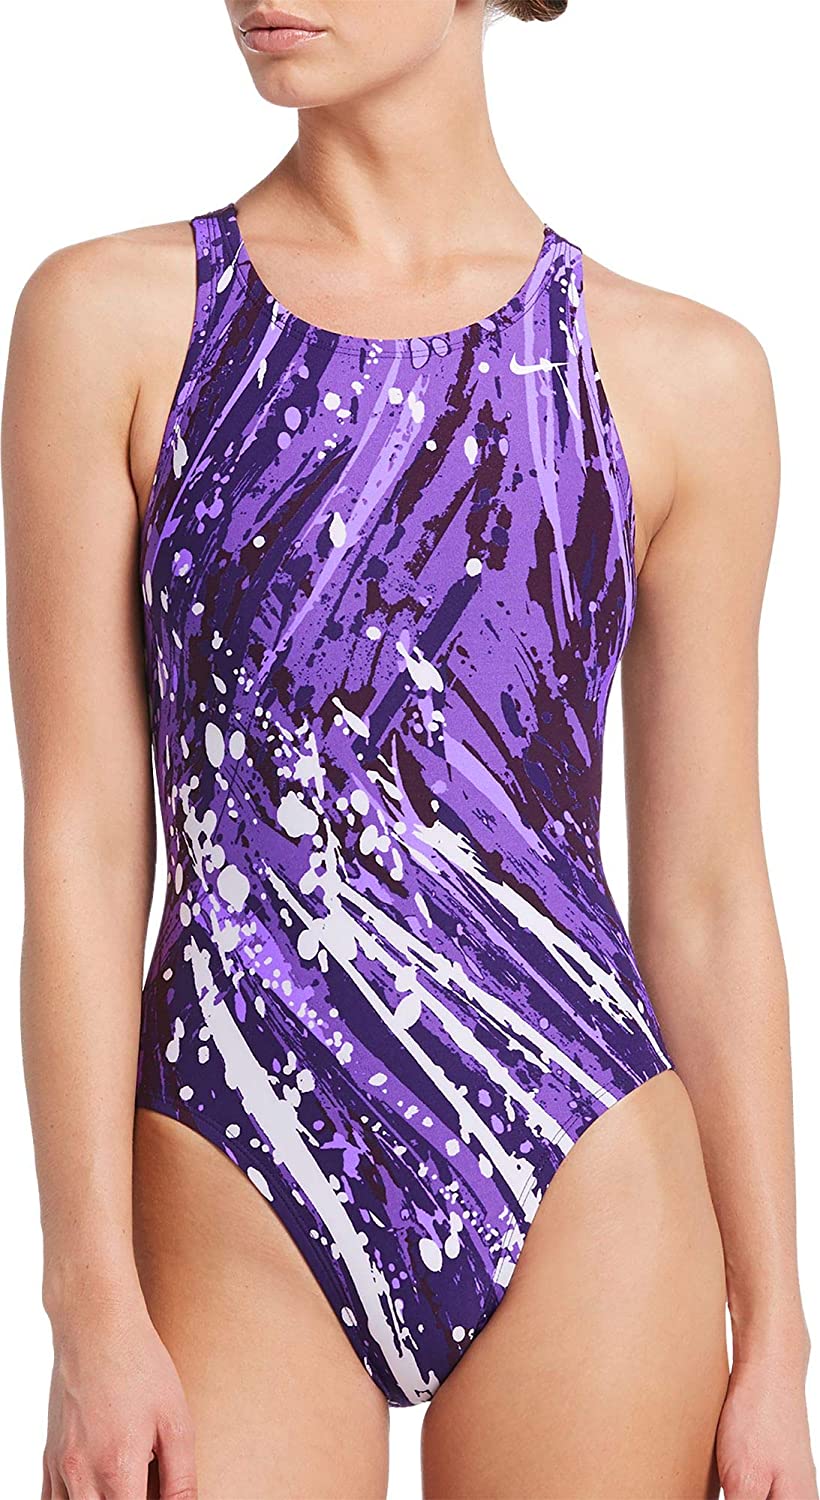 Nike Swim Women's Fast Back One Piece in Court Purple color from the front